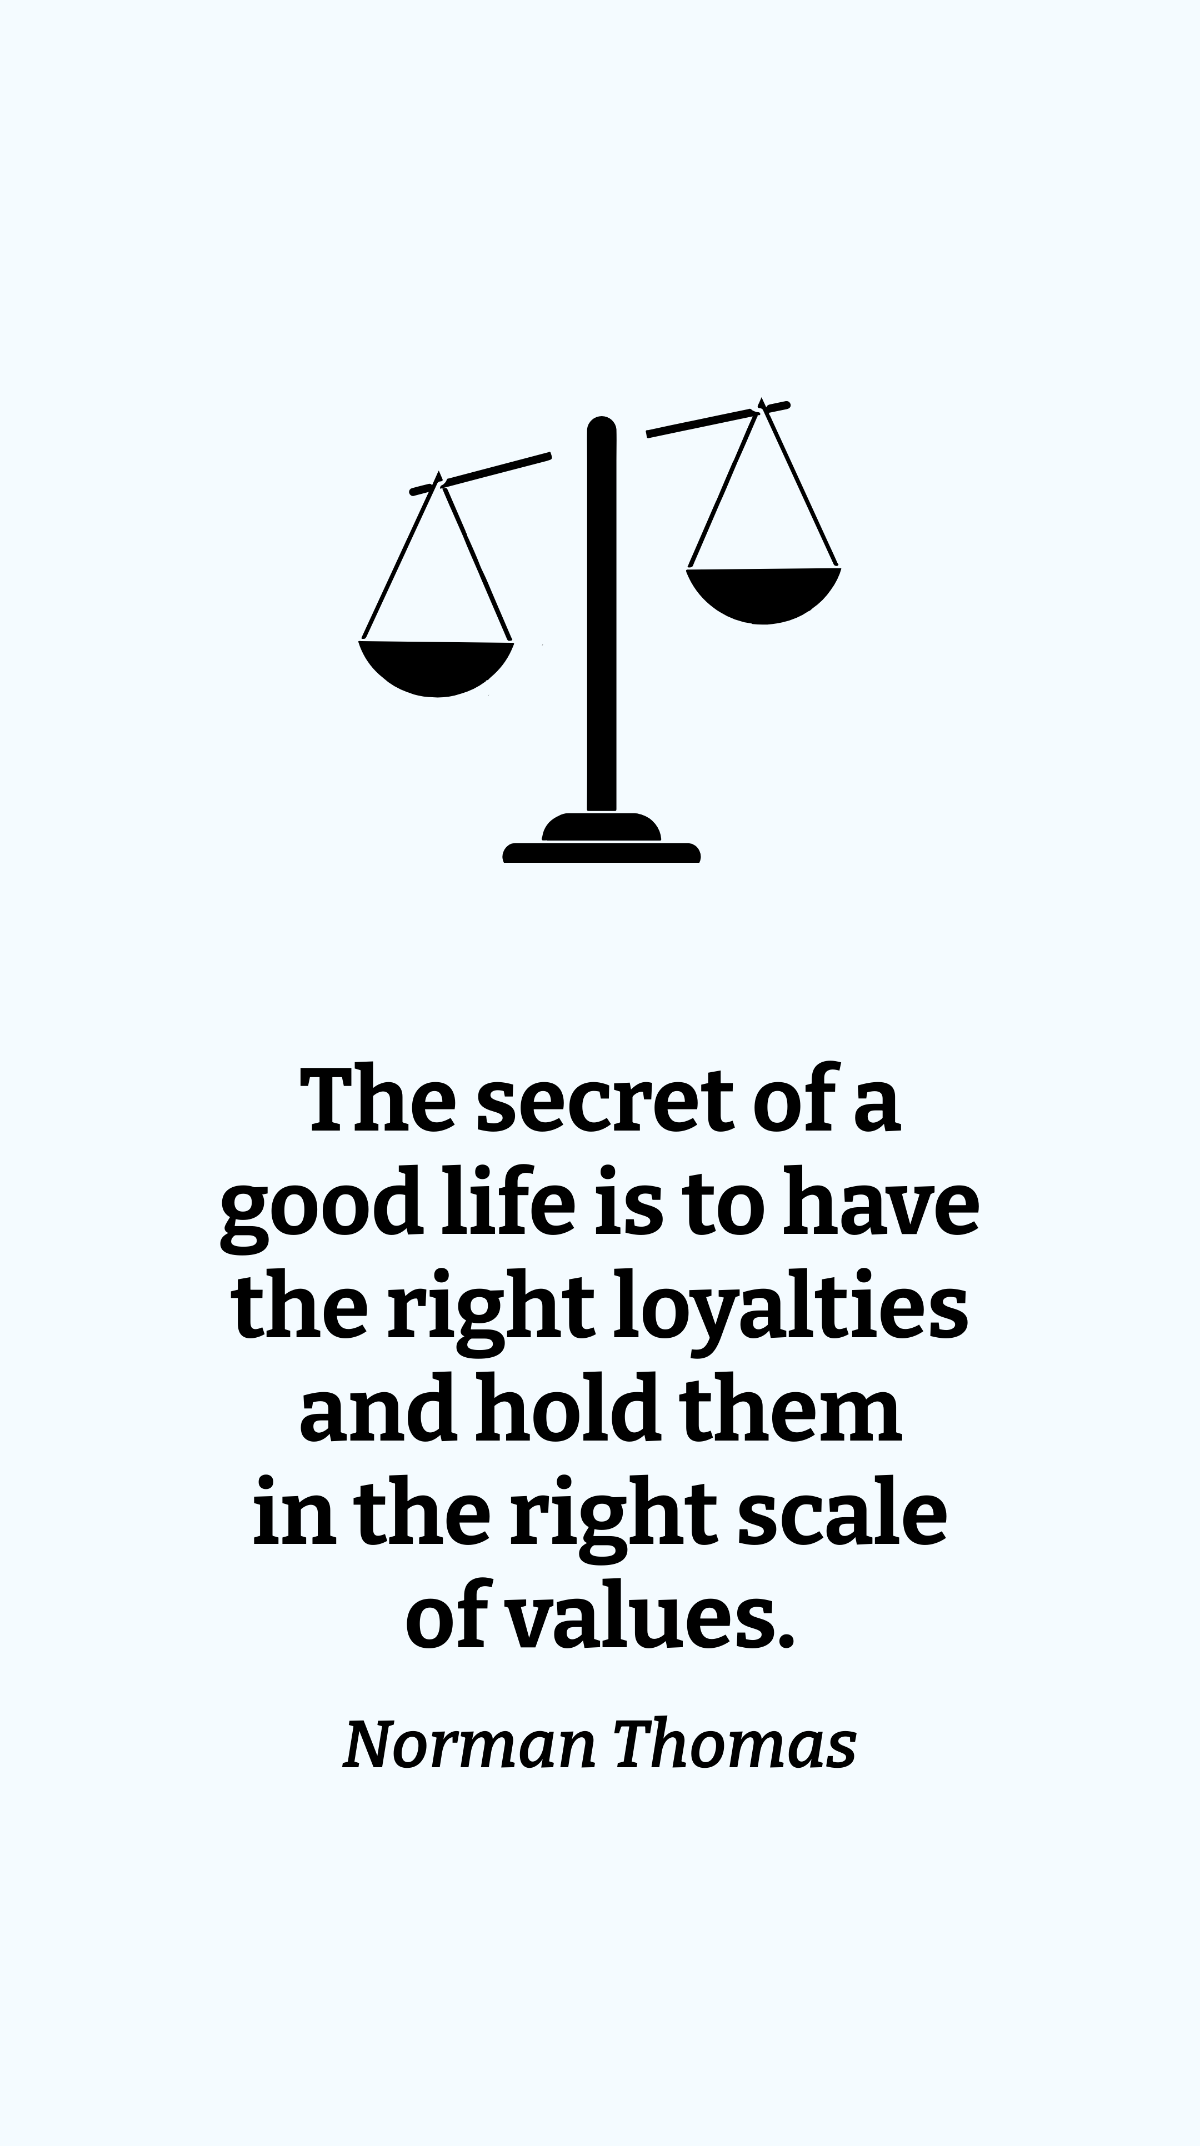 Norman Thomas - The secret of a good life is to have the right loyalties and hold them in the right scale of values.